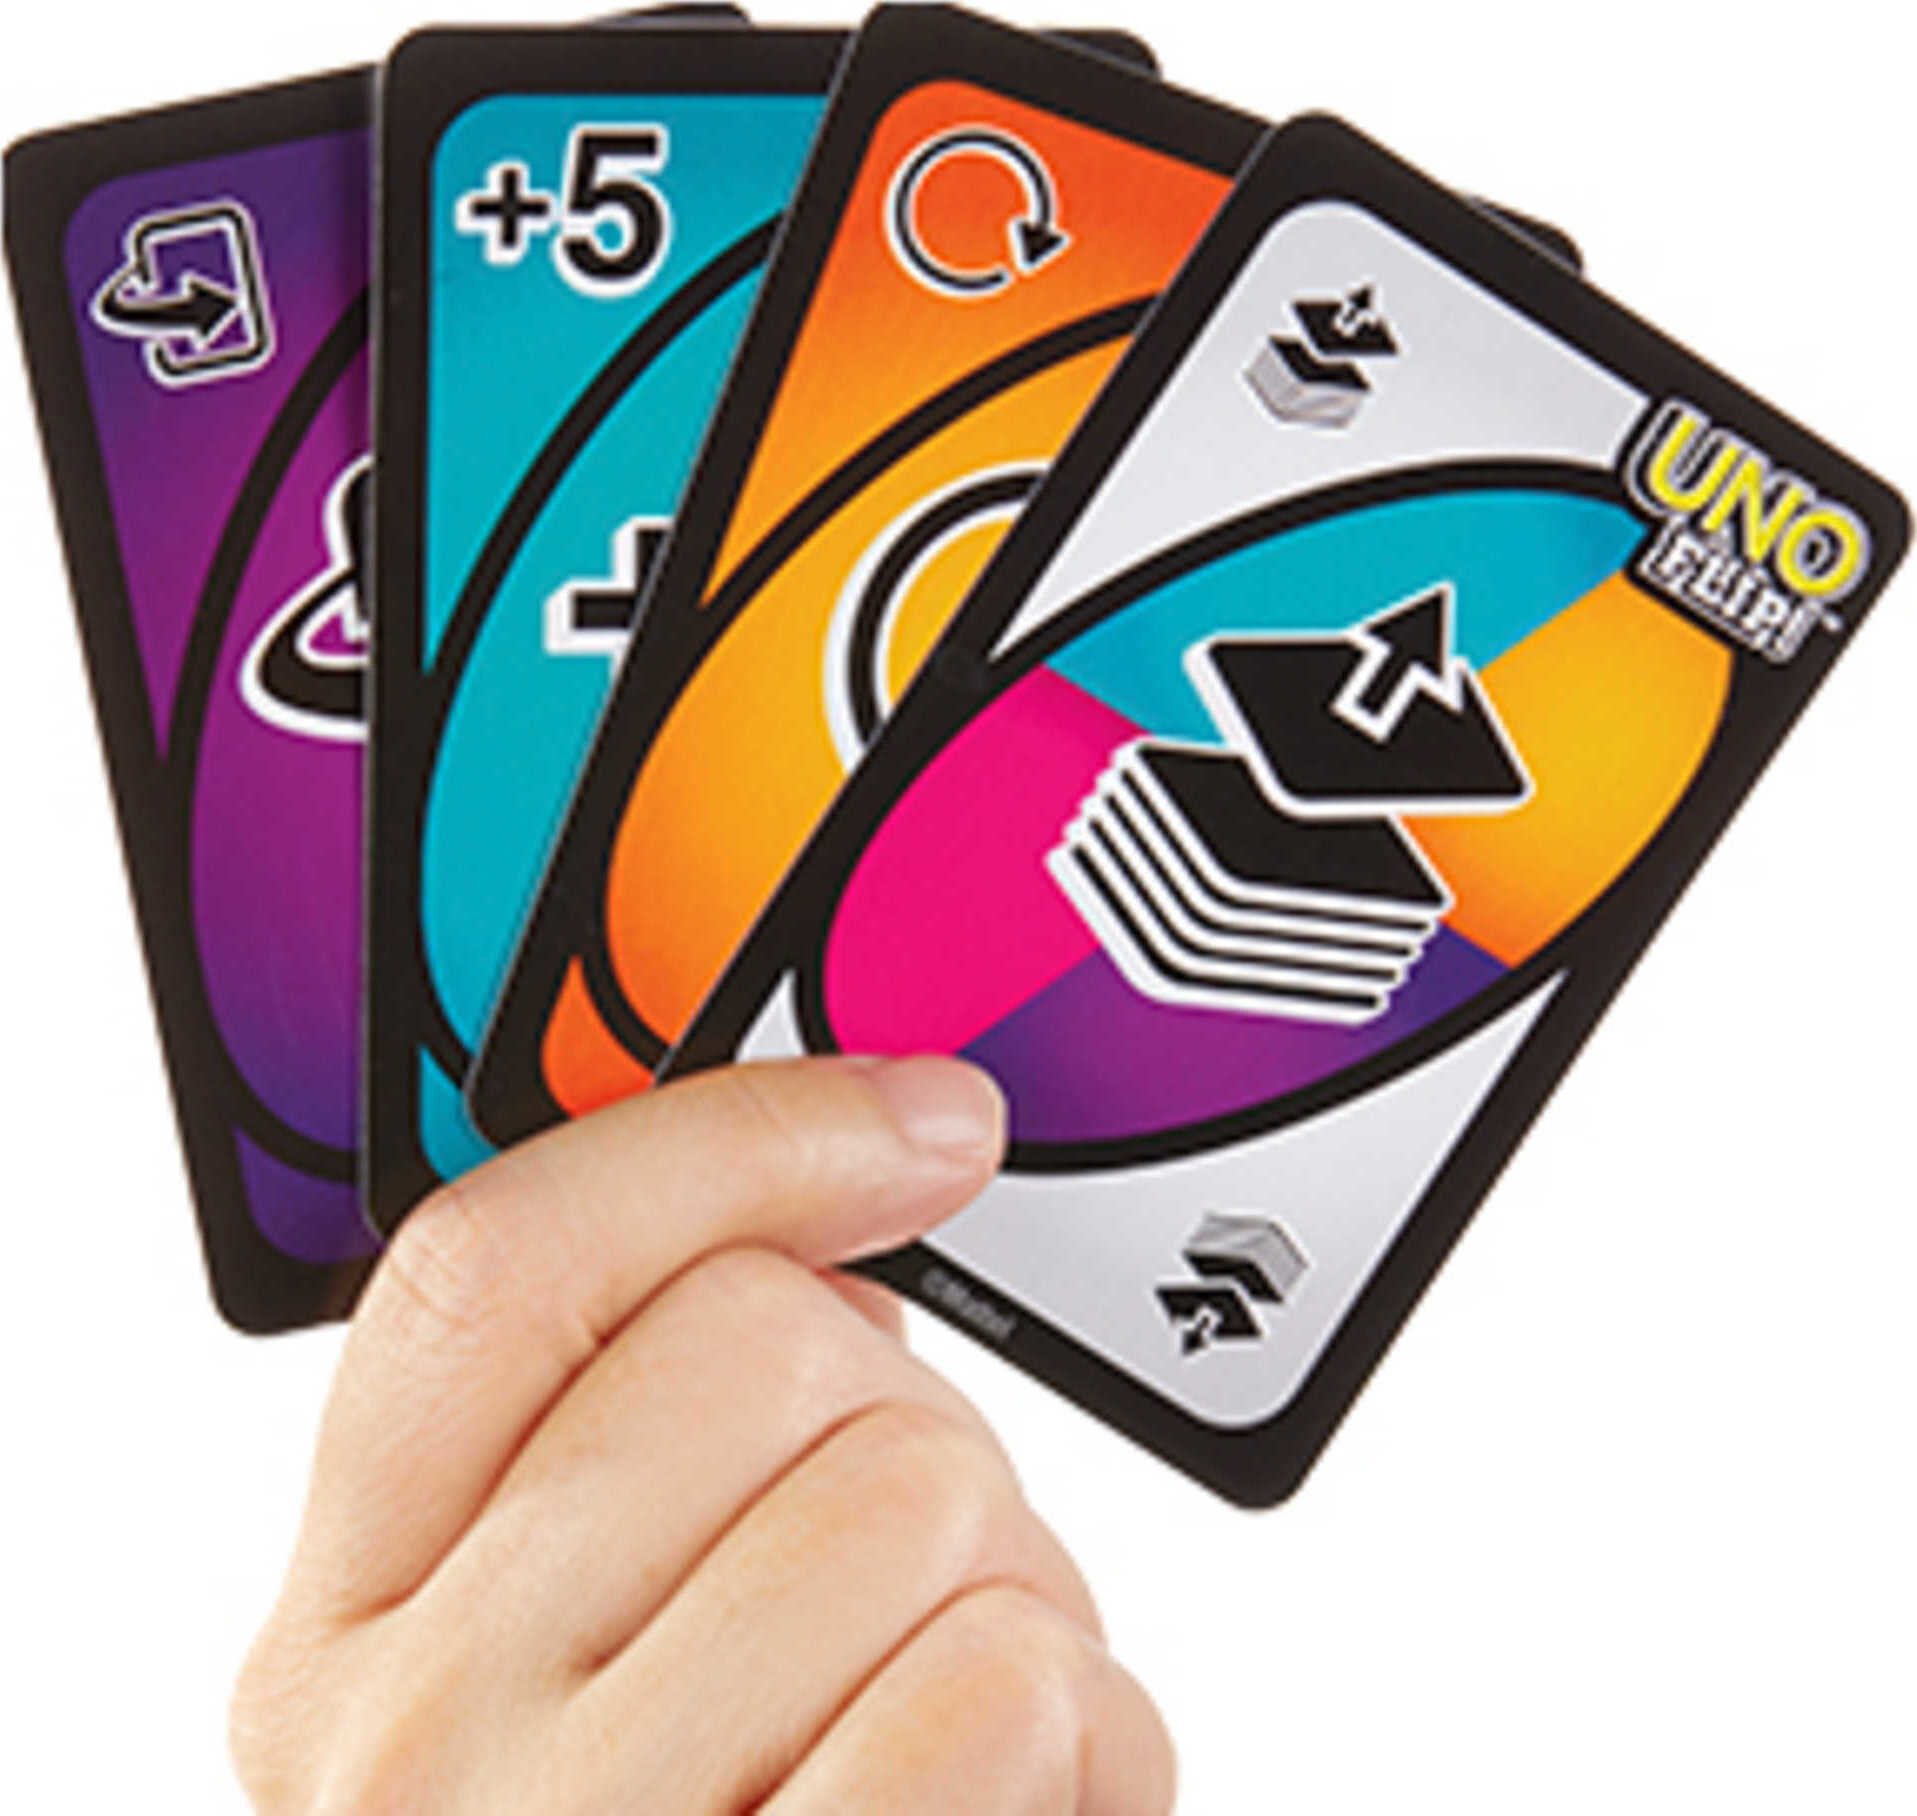 UNO Flip! Card Game for Kids, Adults & Family Night with Double-Sided Cards, Light & Dark - image 5 of 7